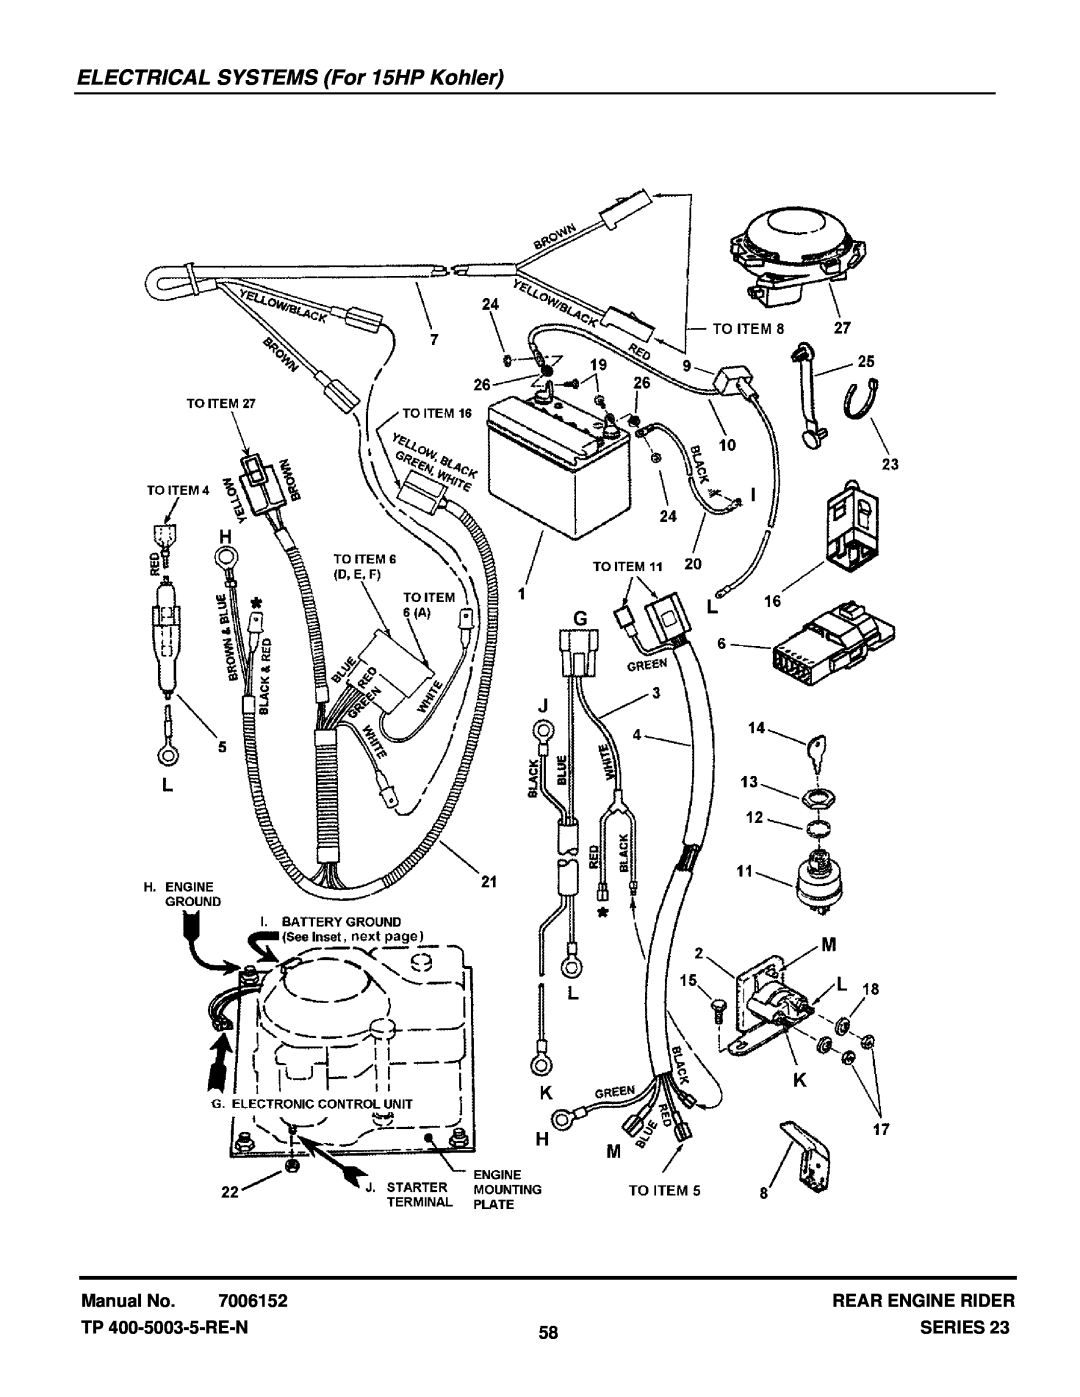 Snapper 301123BV (84941) ELECTRICAL SYSTEMS For 15HP Kohler, Manual No, 7006152, Rear Engine Rider, TP 400-5003-5-RE-N 